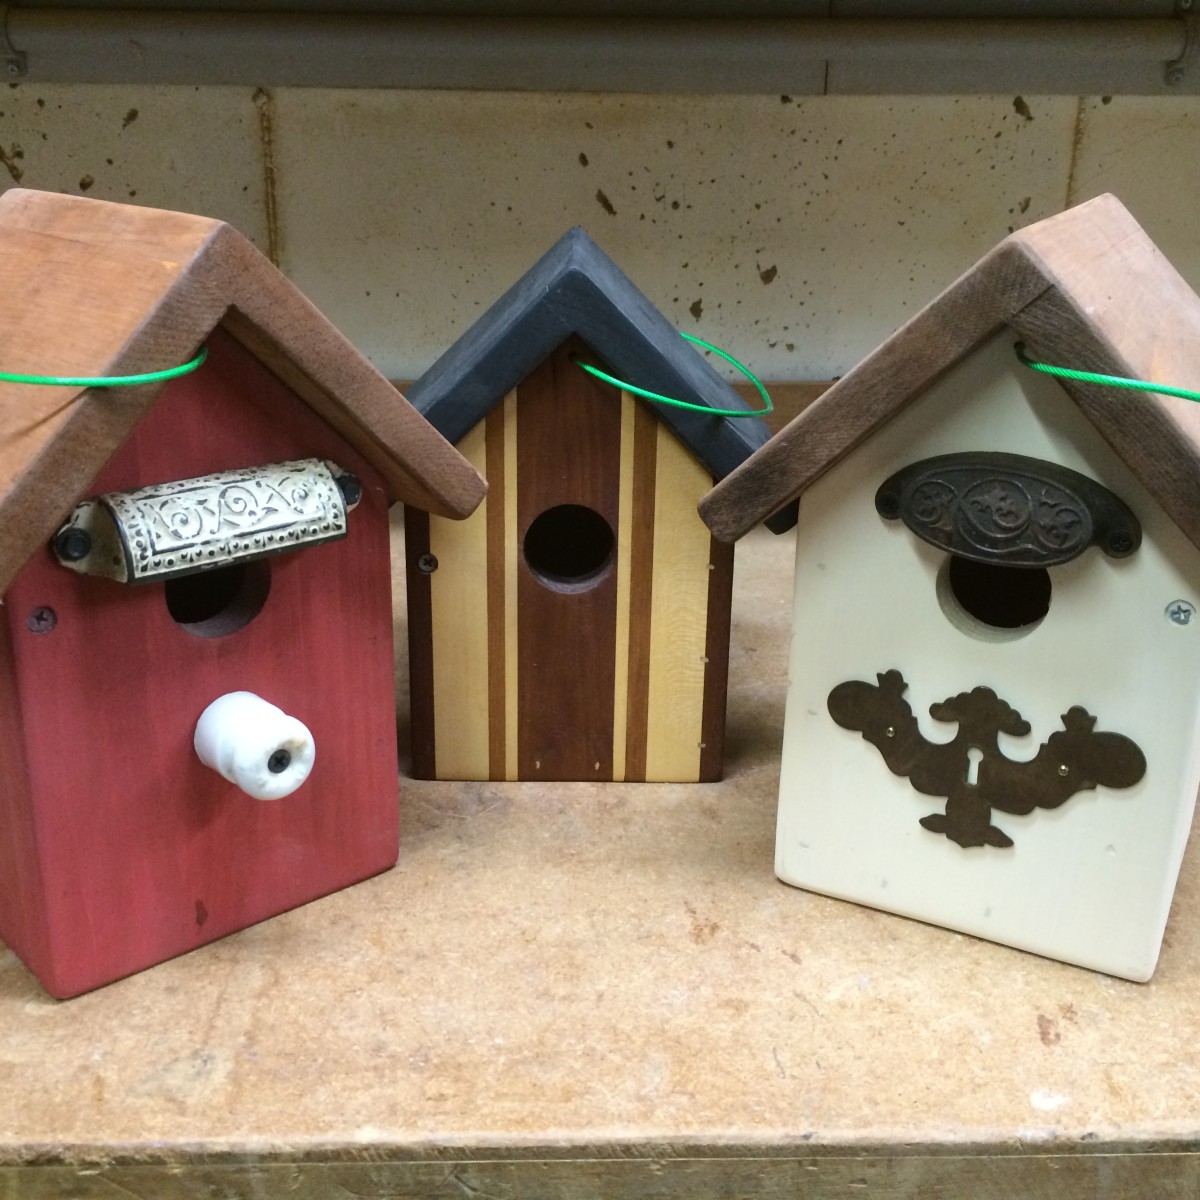 Variations on a theme: these hanging birdhouse will attract wrens.